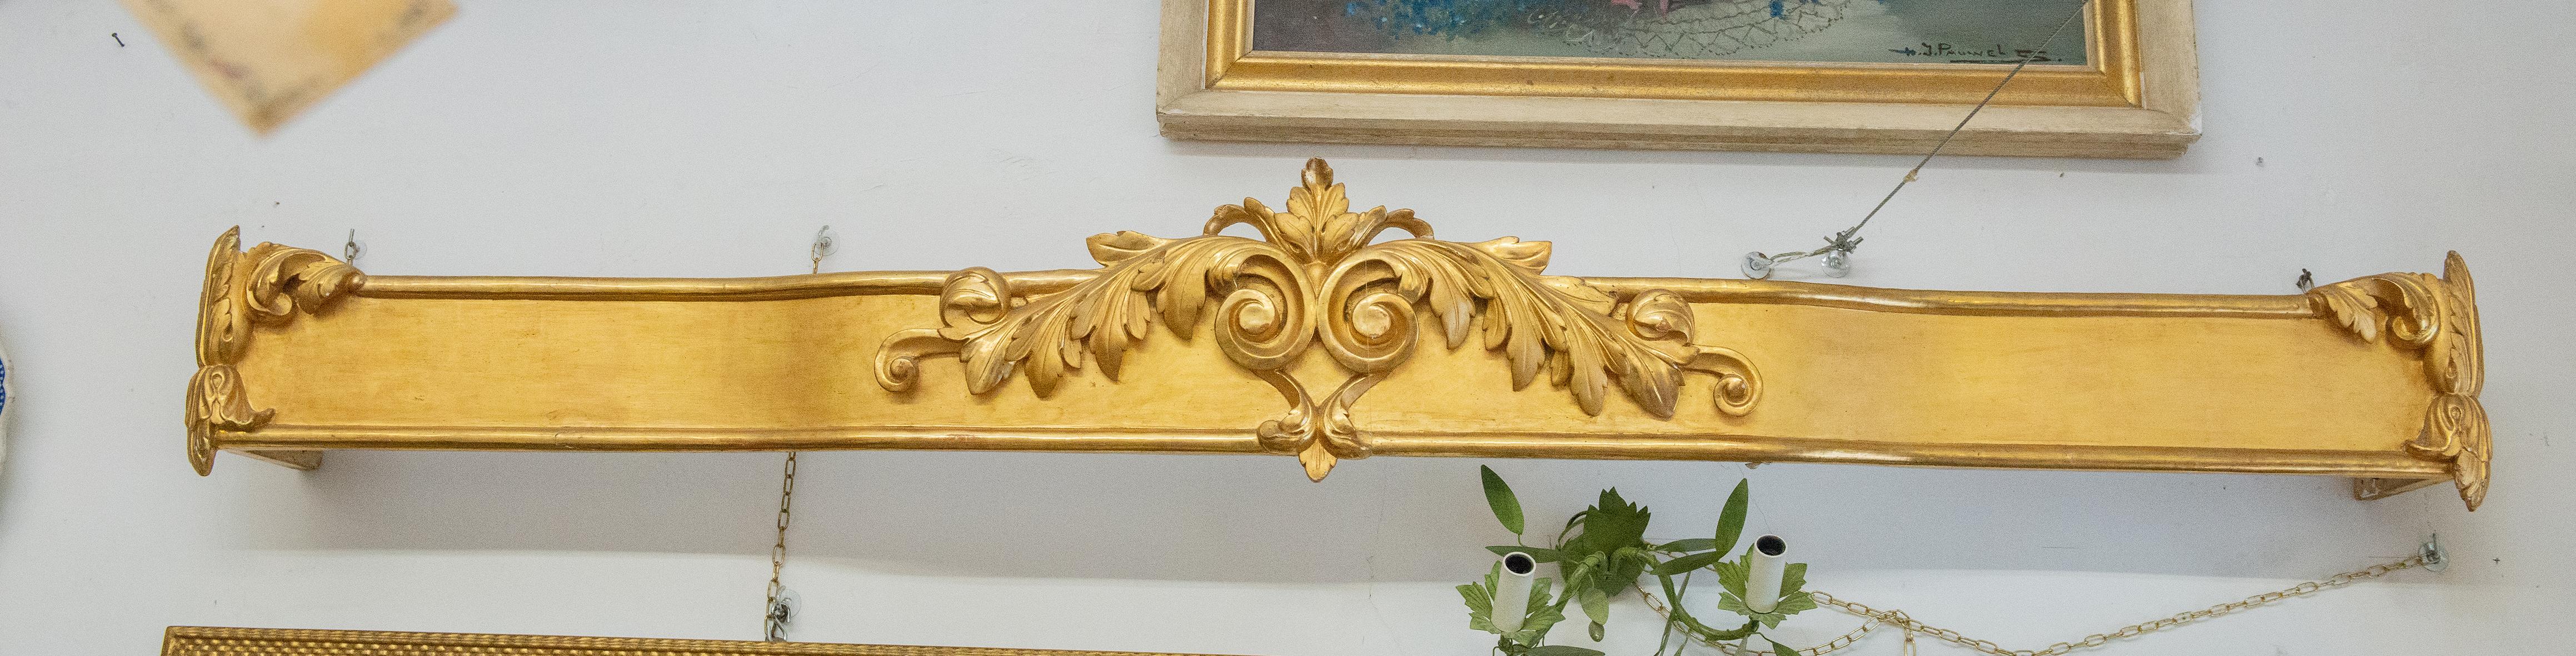 M/1693 - Wonderful unique old curtain rod : large 194 cm. ! with a rich coping - single piece - 
See all sides at the bottom of the description -
No comment. You can see.




   